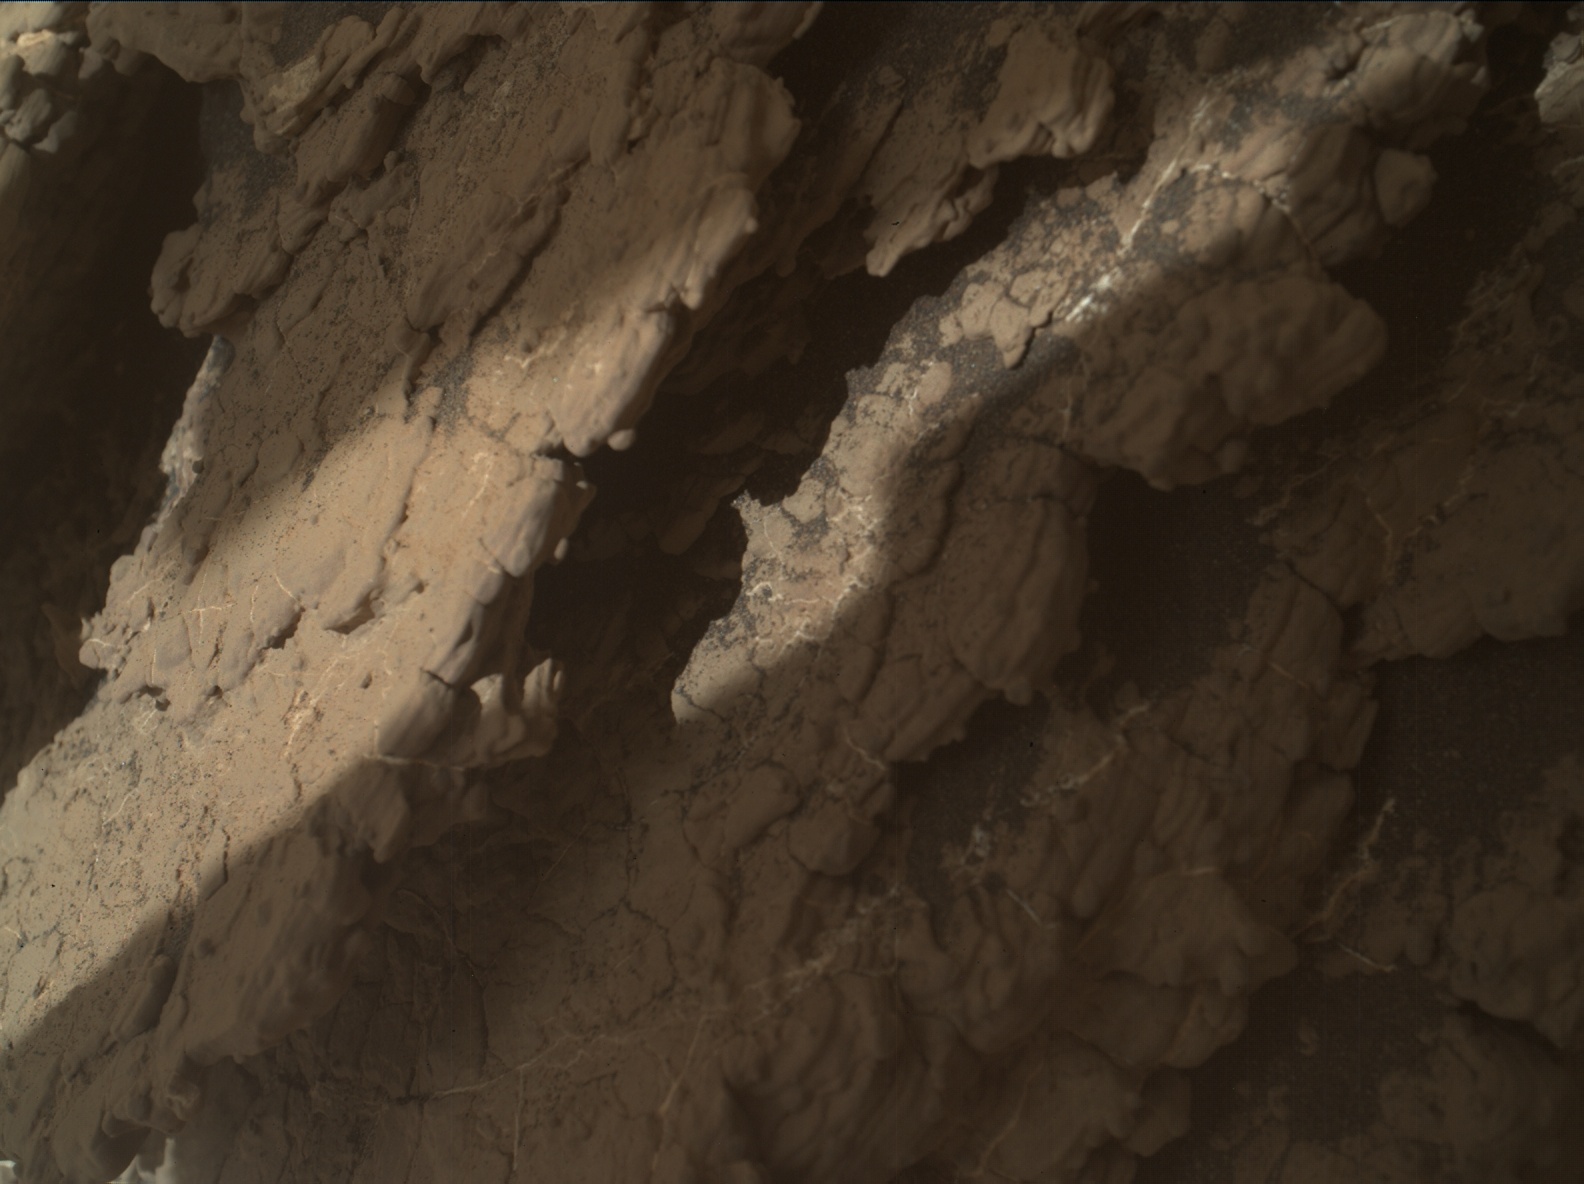 Nasa's Mars rover Curiosity acquired this image using its Mars Hand Lens Imager (MAHLI) on Sol 2606